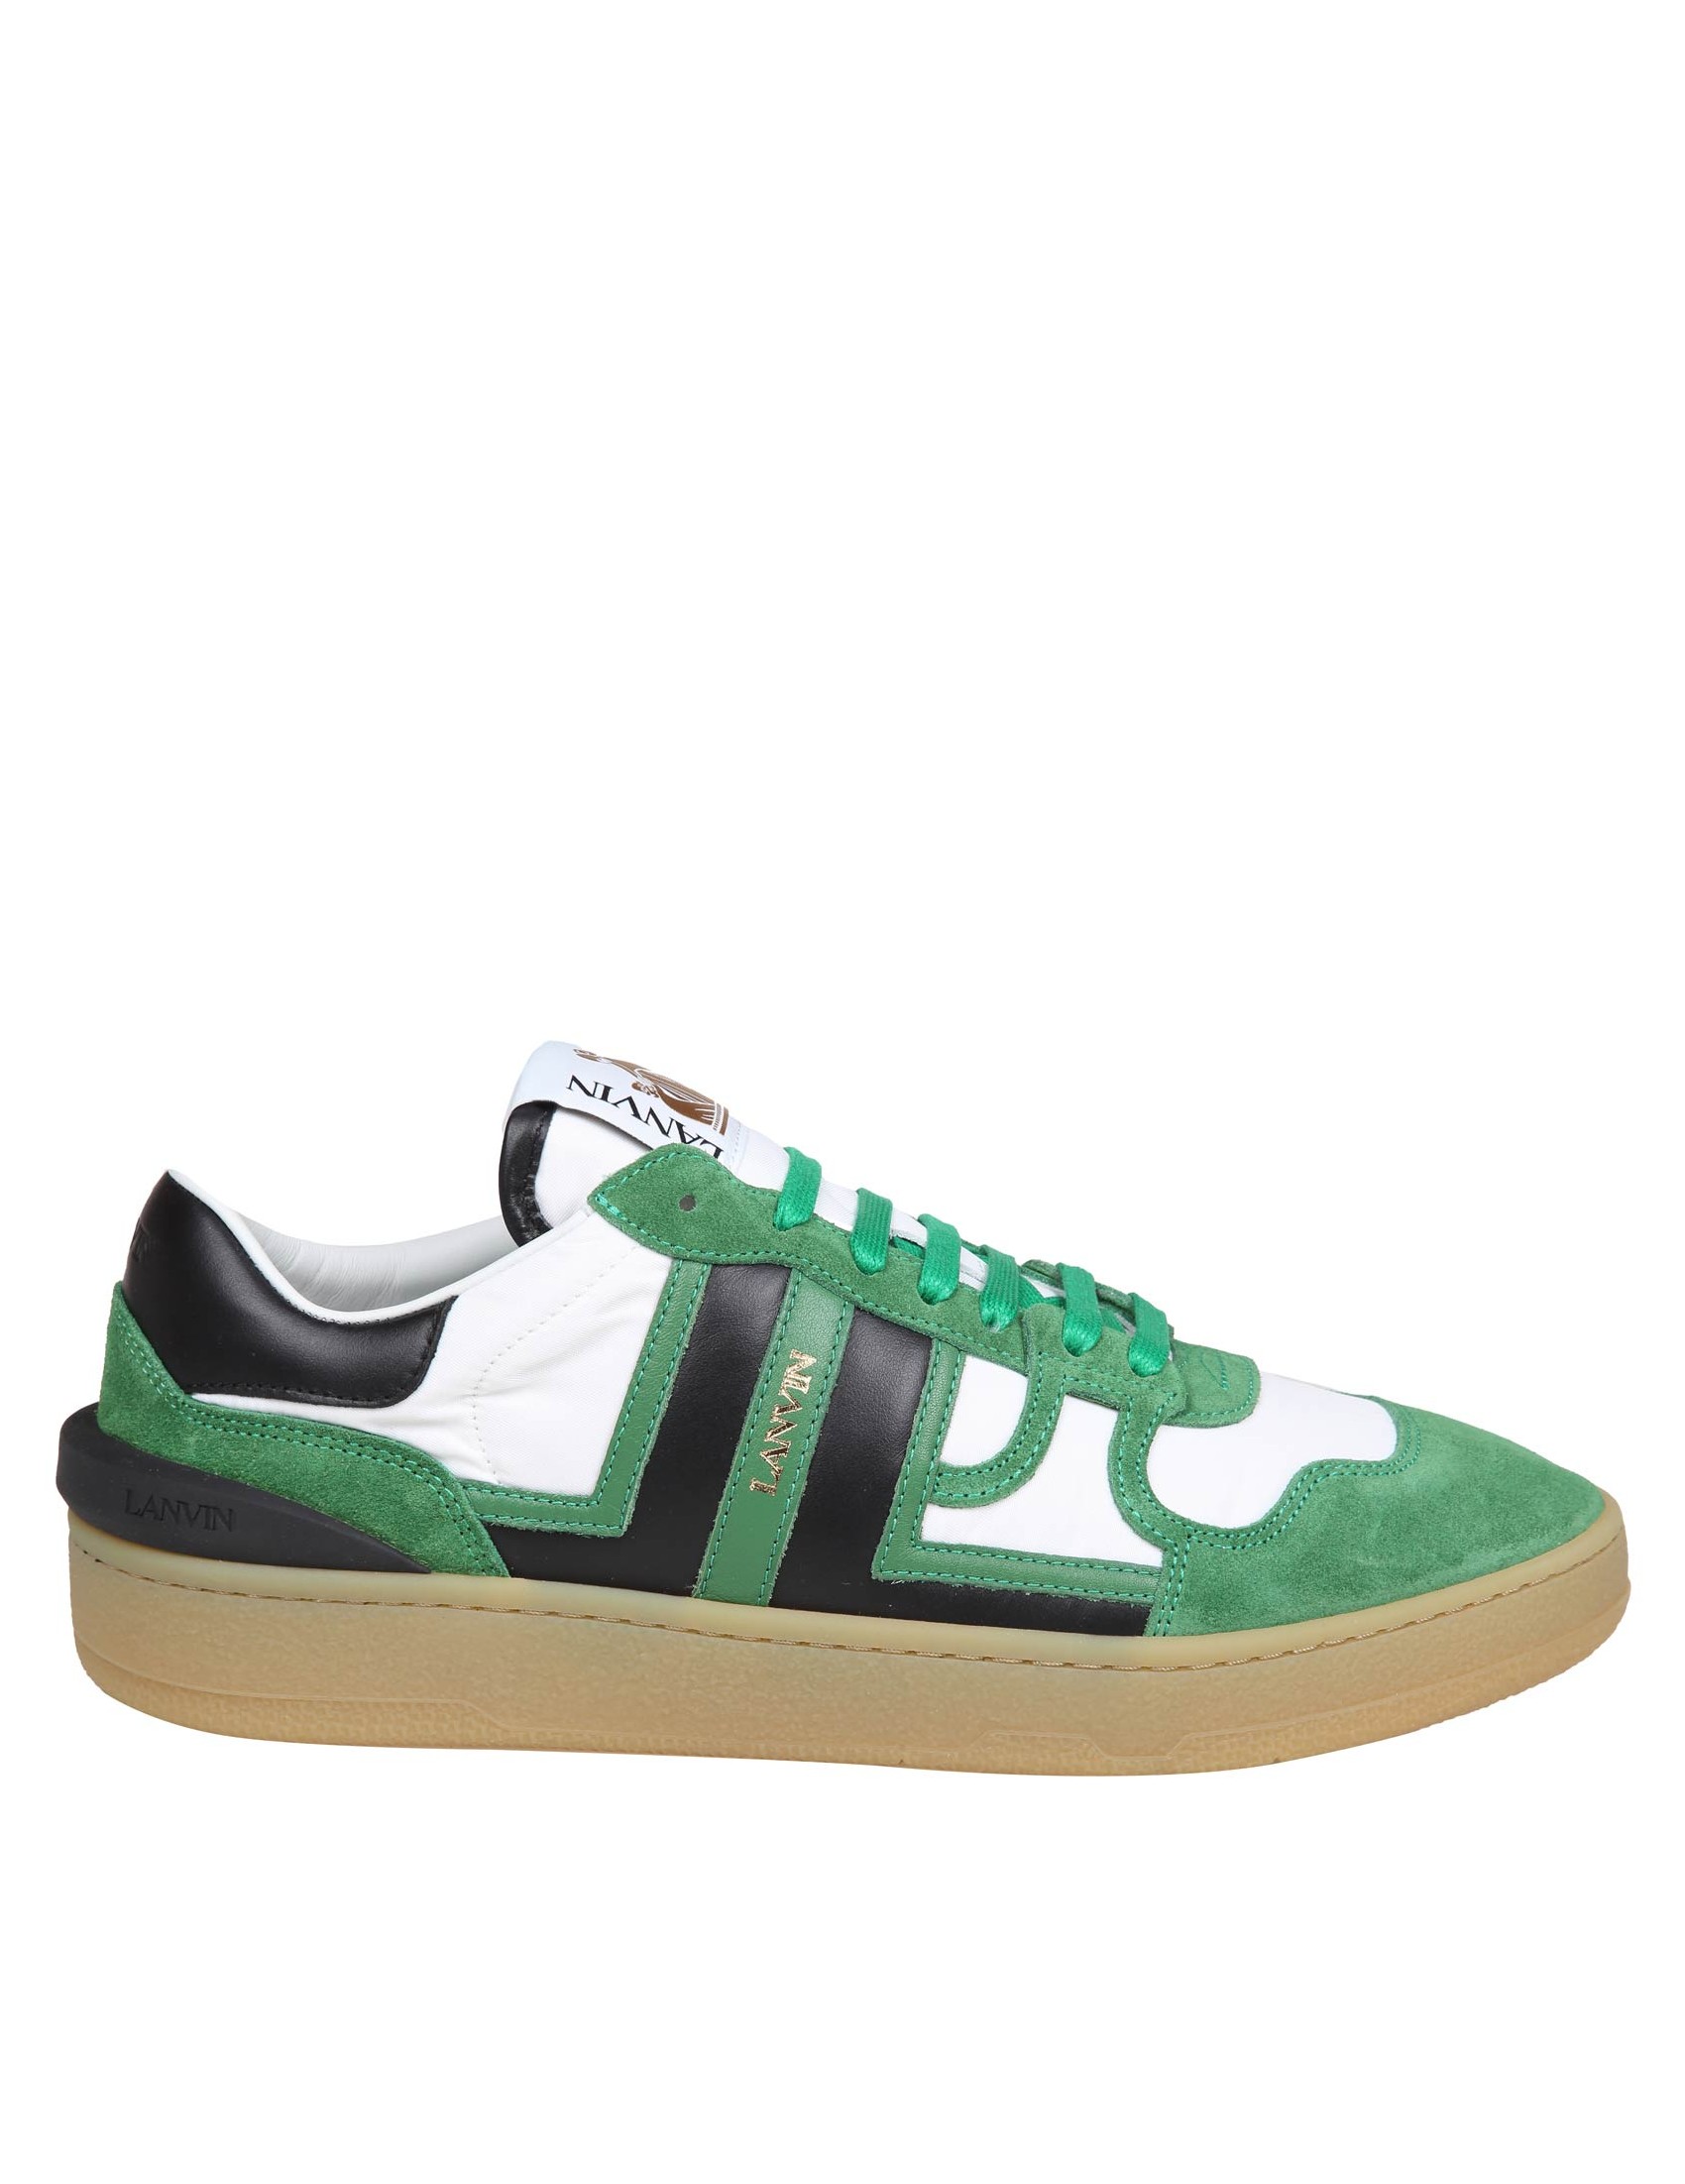 CLAY LOW TOP SNEAKERS IN LEATHER AND NYLON, GREEN/BLACK COLOR